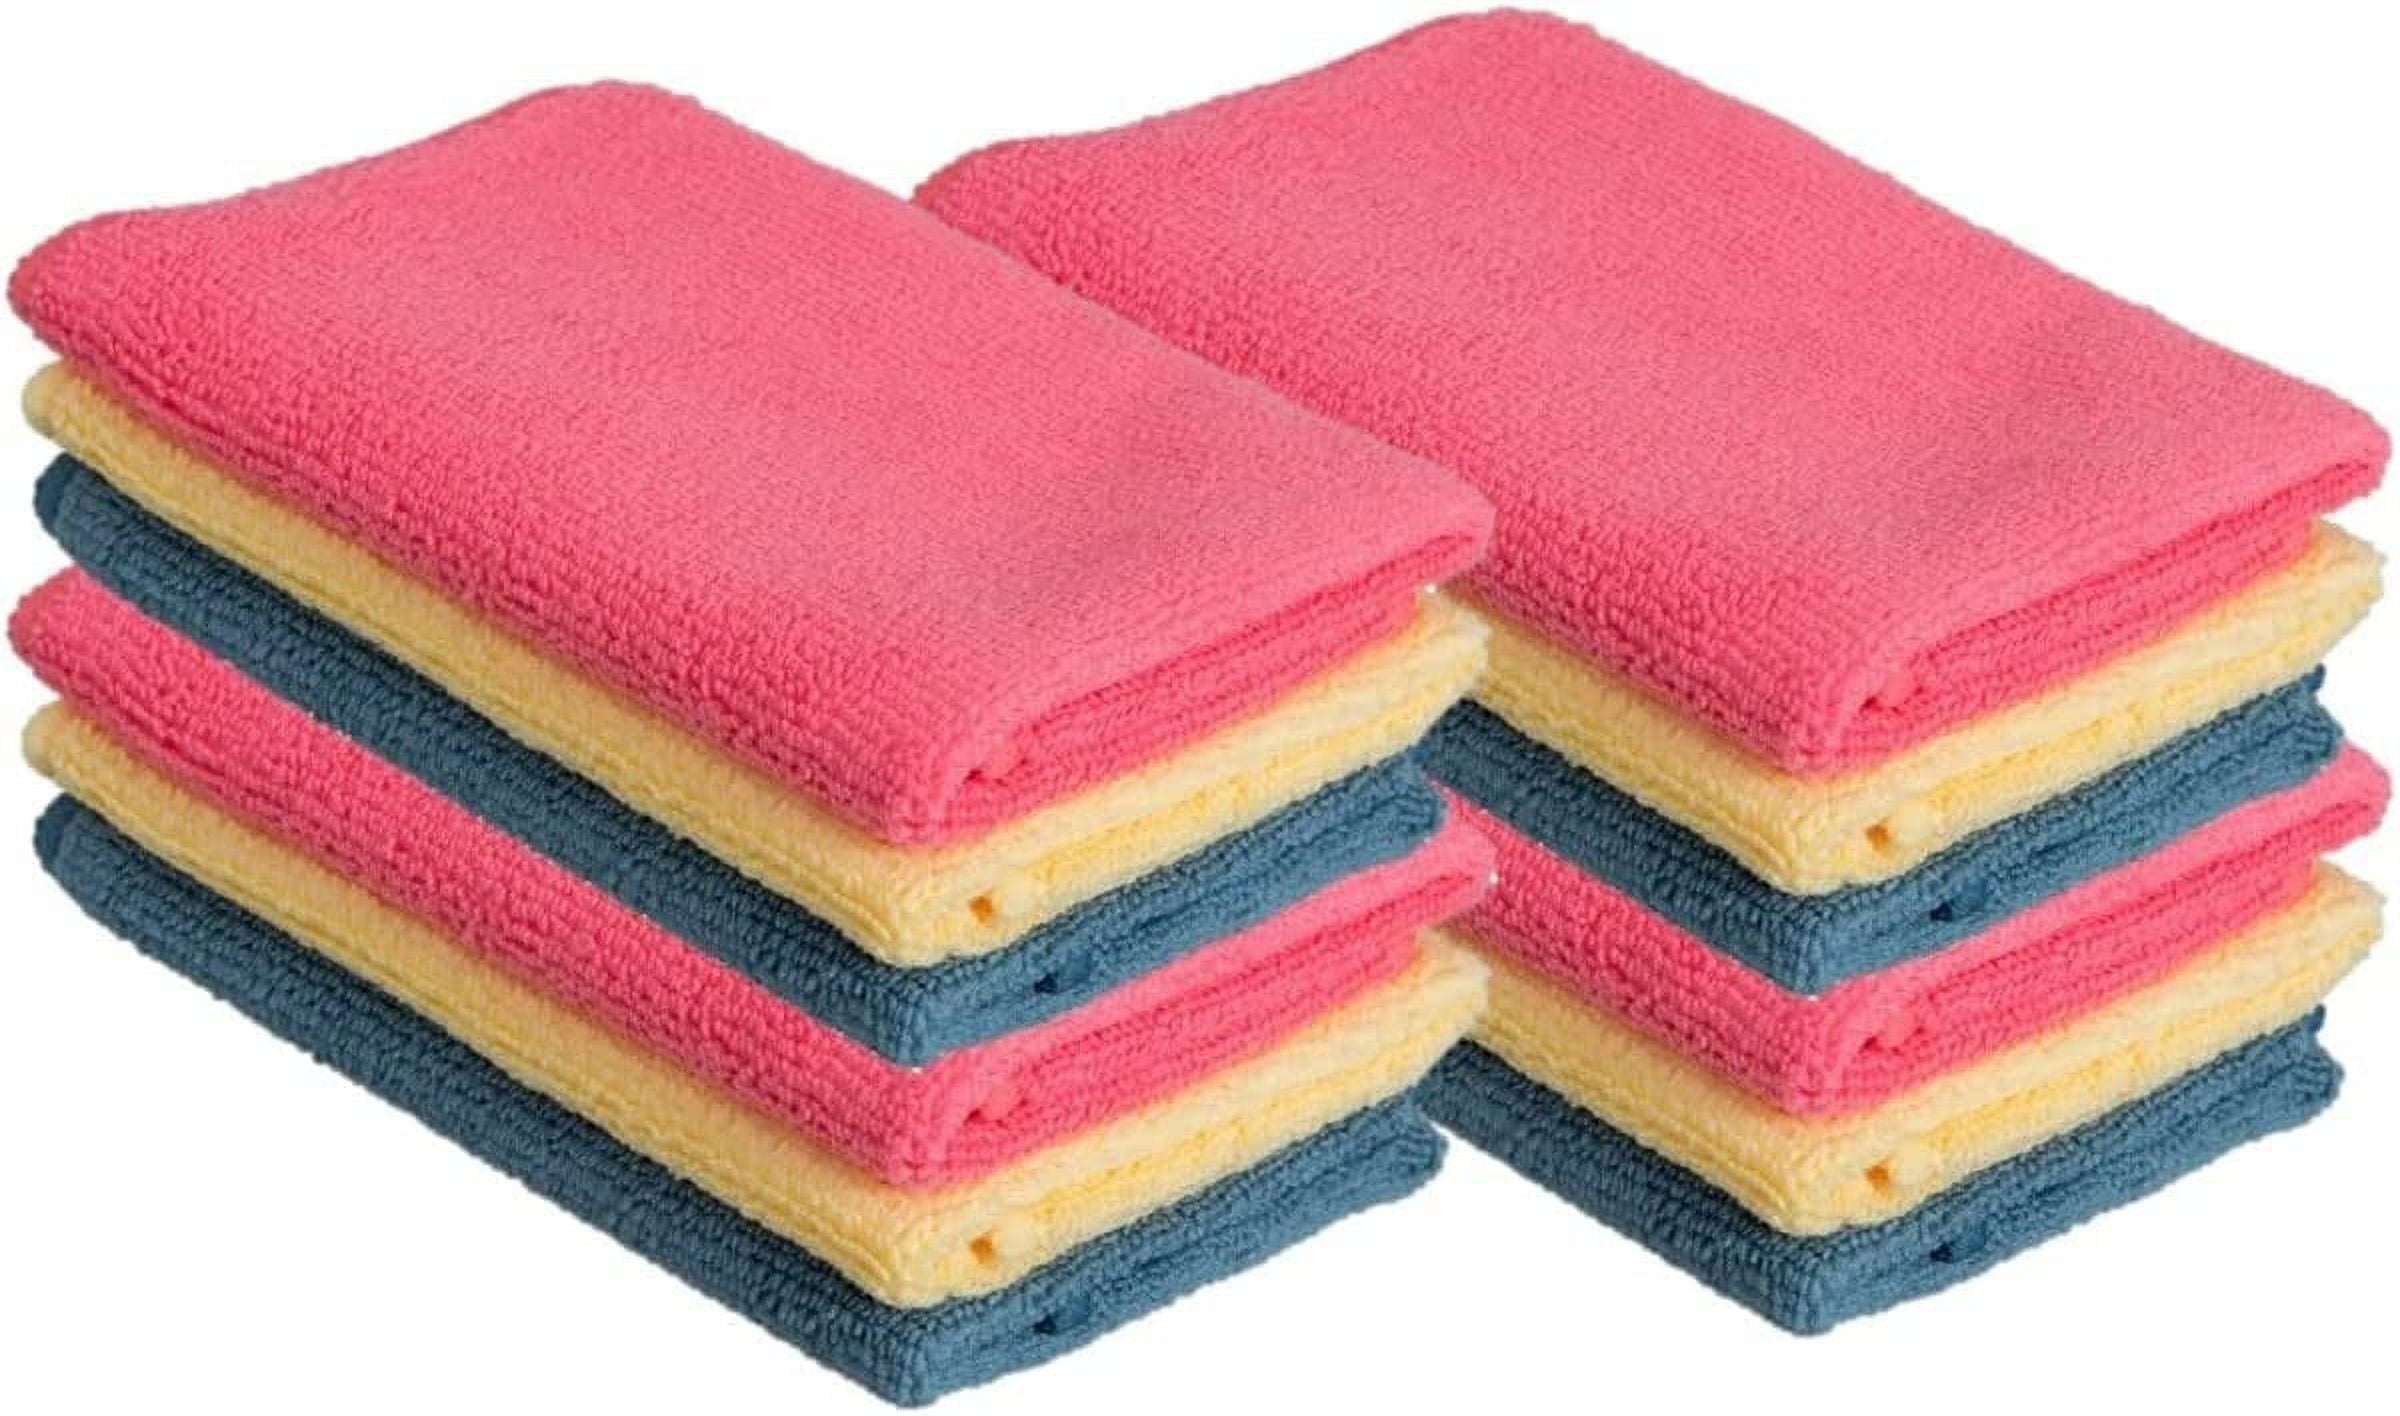 Hua Trade 12 Pack Super Soft Microfiber Cleaning Cloths, Eco-Friendly Kitchen Towels Wash Cloths - Car Cleaning Cloths Machine Washable, Super Absorbent